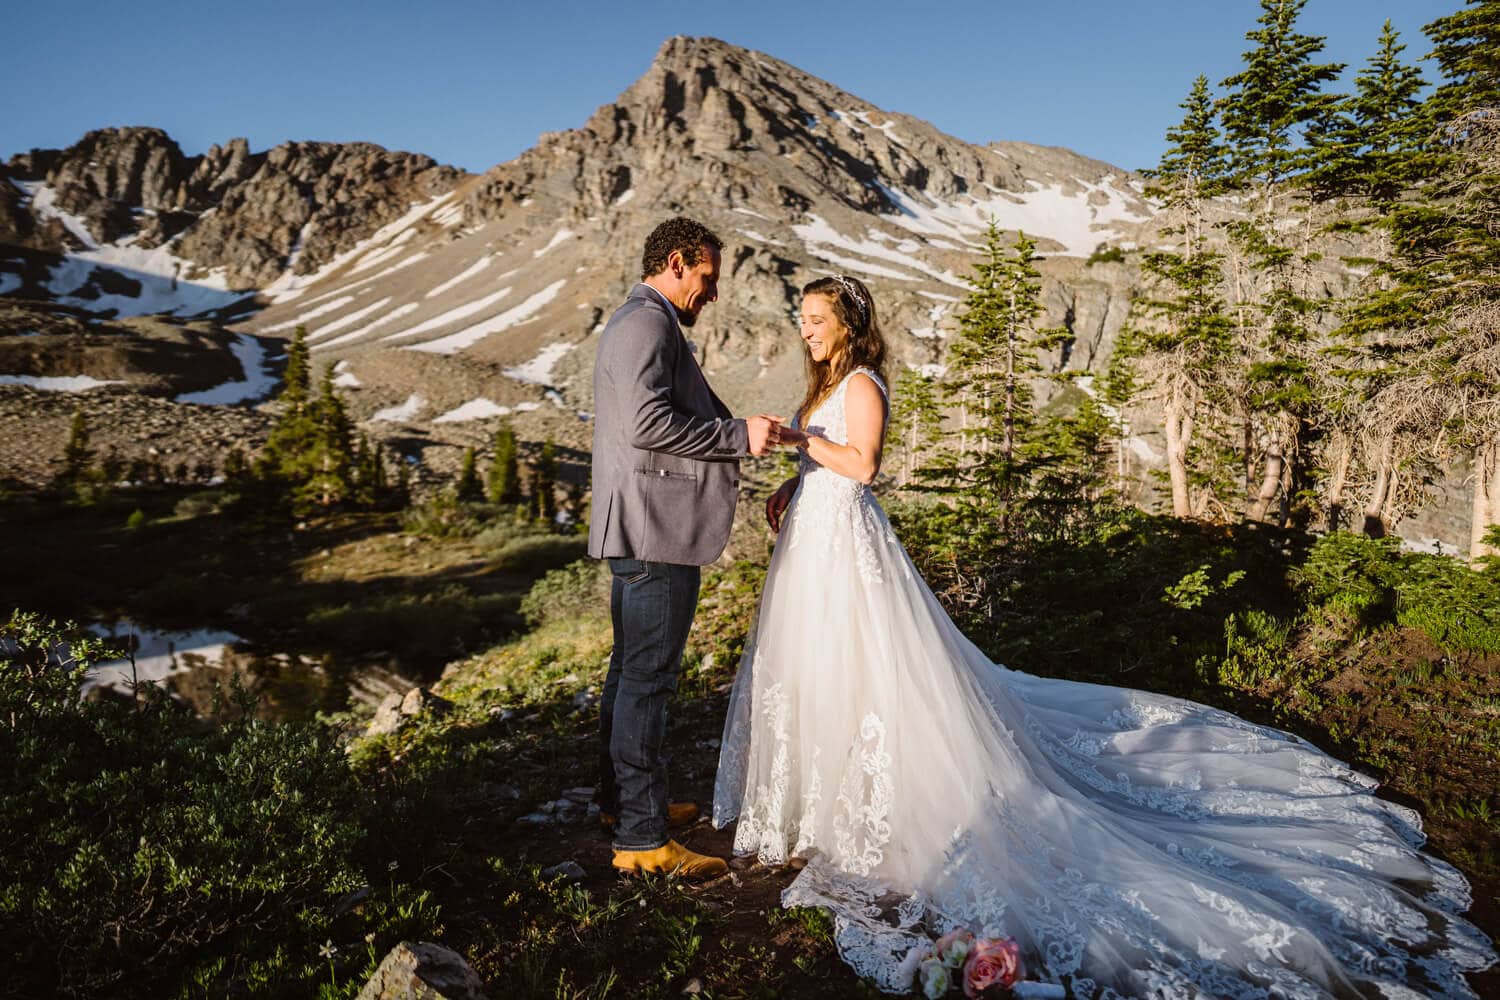 A couple exchanging their rings during their Self-Solemnization in Colorado.